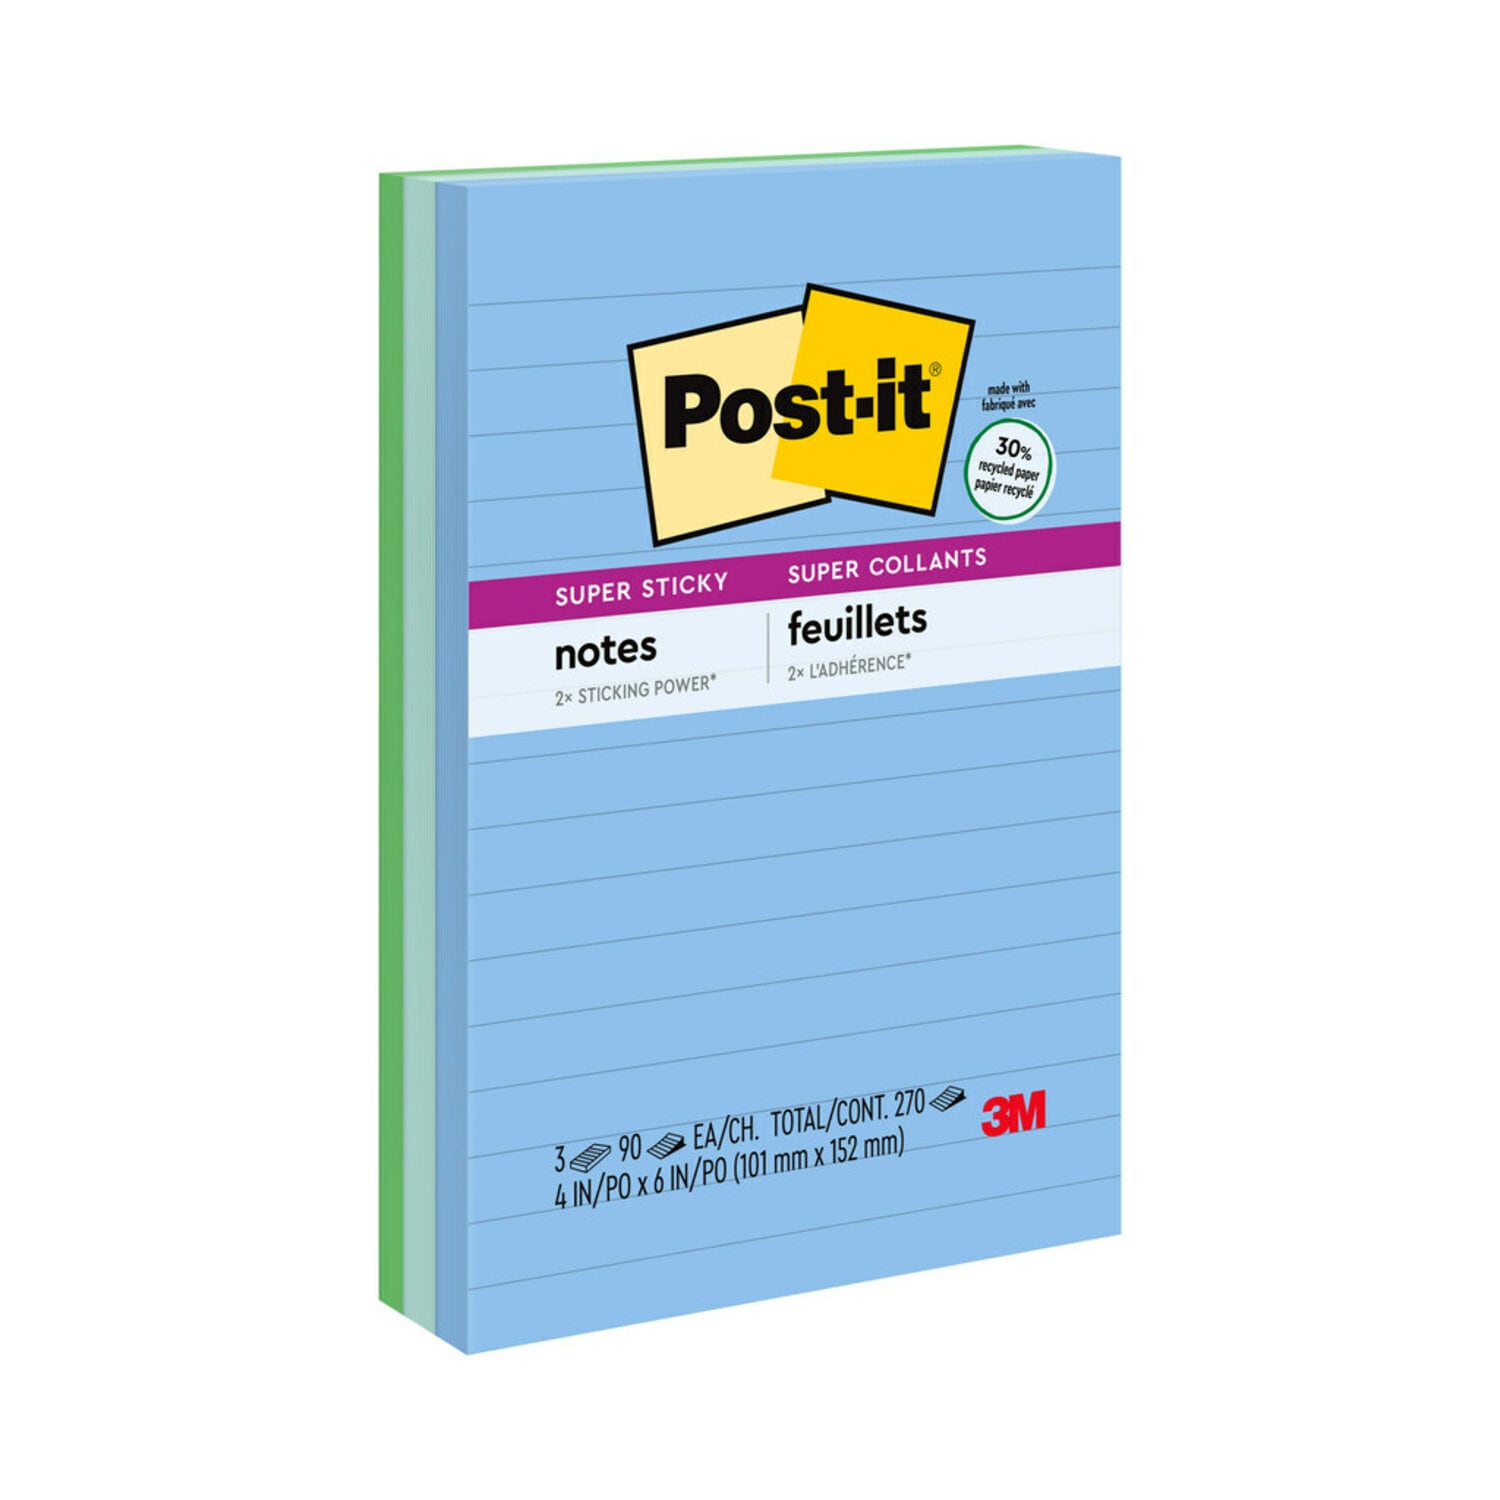 7010311470 - Post-it Super Sticky Recycled Notes 660-3SST, 4 in x 6 in (101 mm x 152
mm) Bora Bora Collection, Lined, 3 Pads/Pack